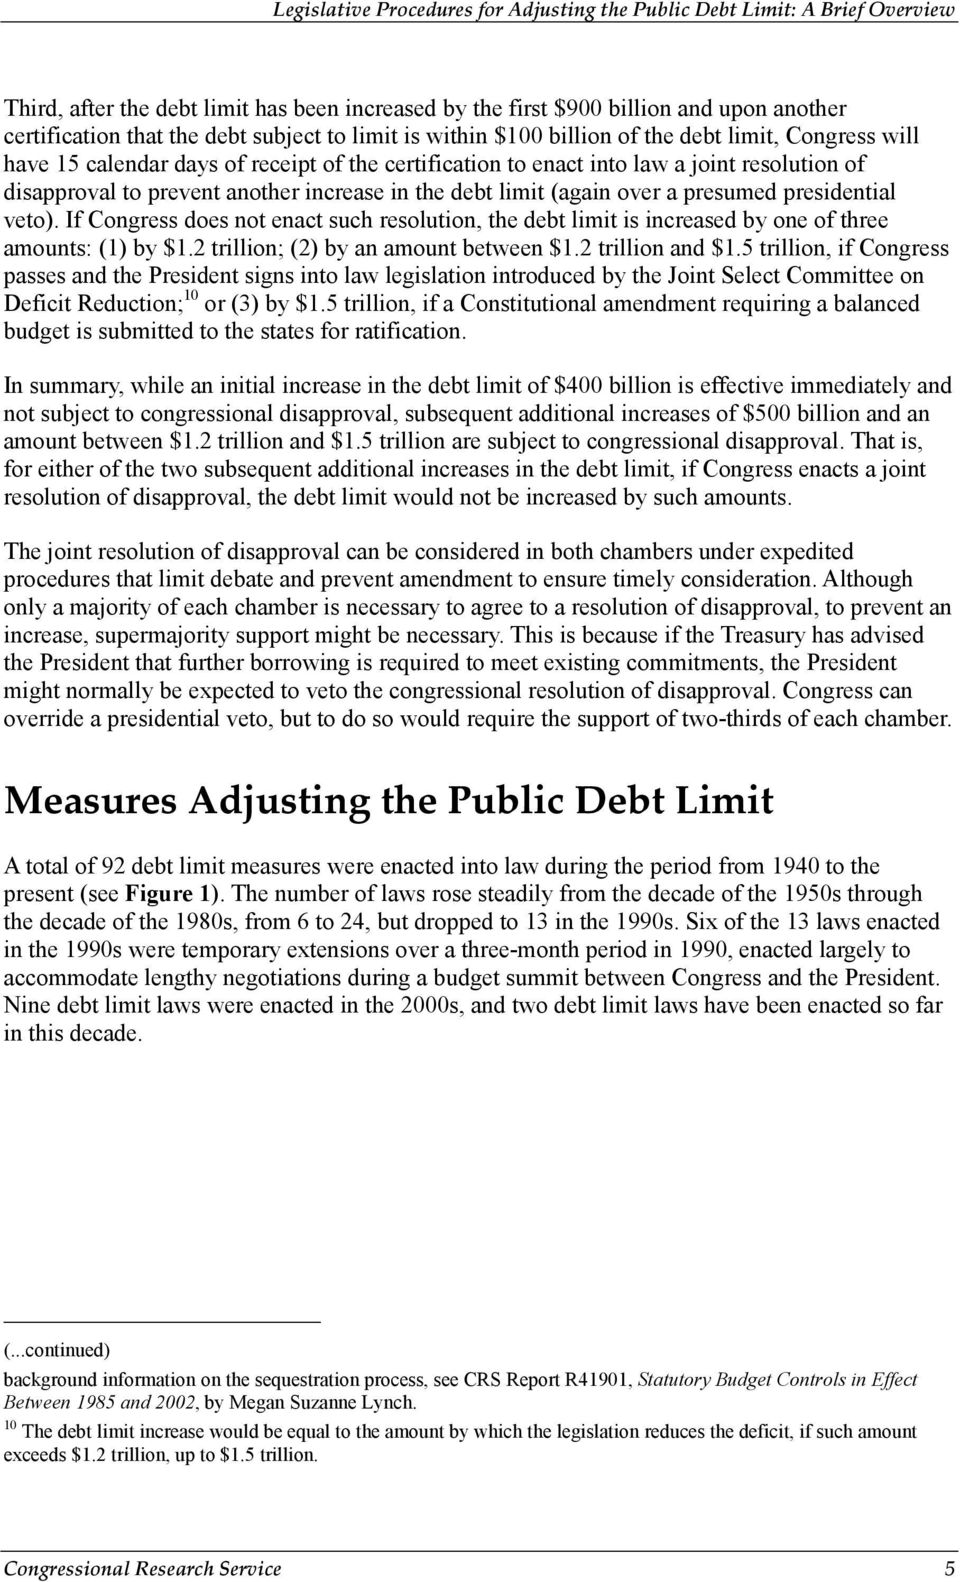 If Congress does not enact such resolution, the debt limit is increased by one of three amounts: (1) by $1.2 trillion; (2) by an amount between $1.2 trillion and $1.